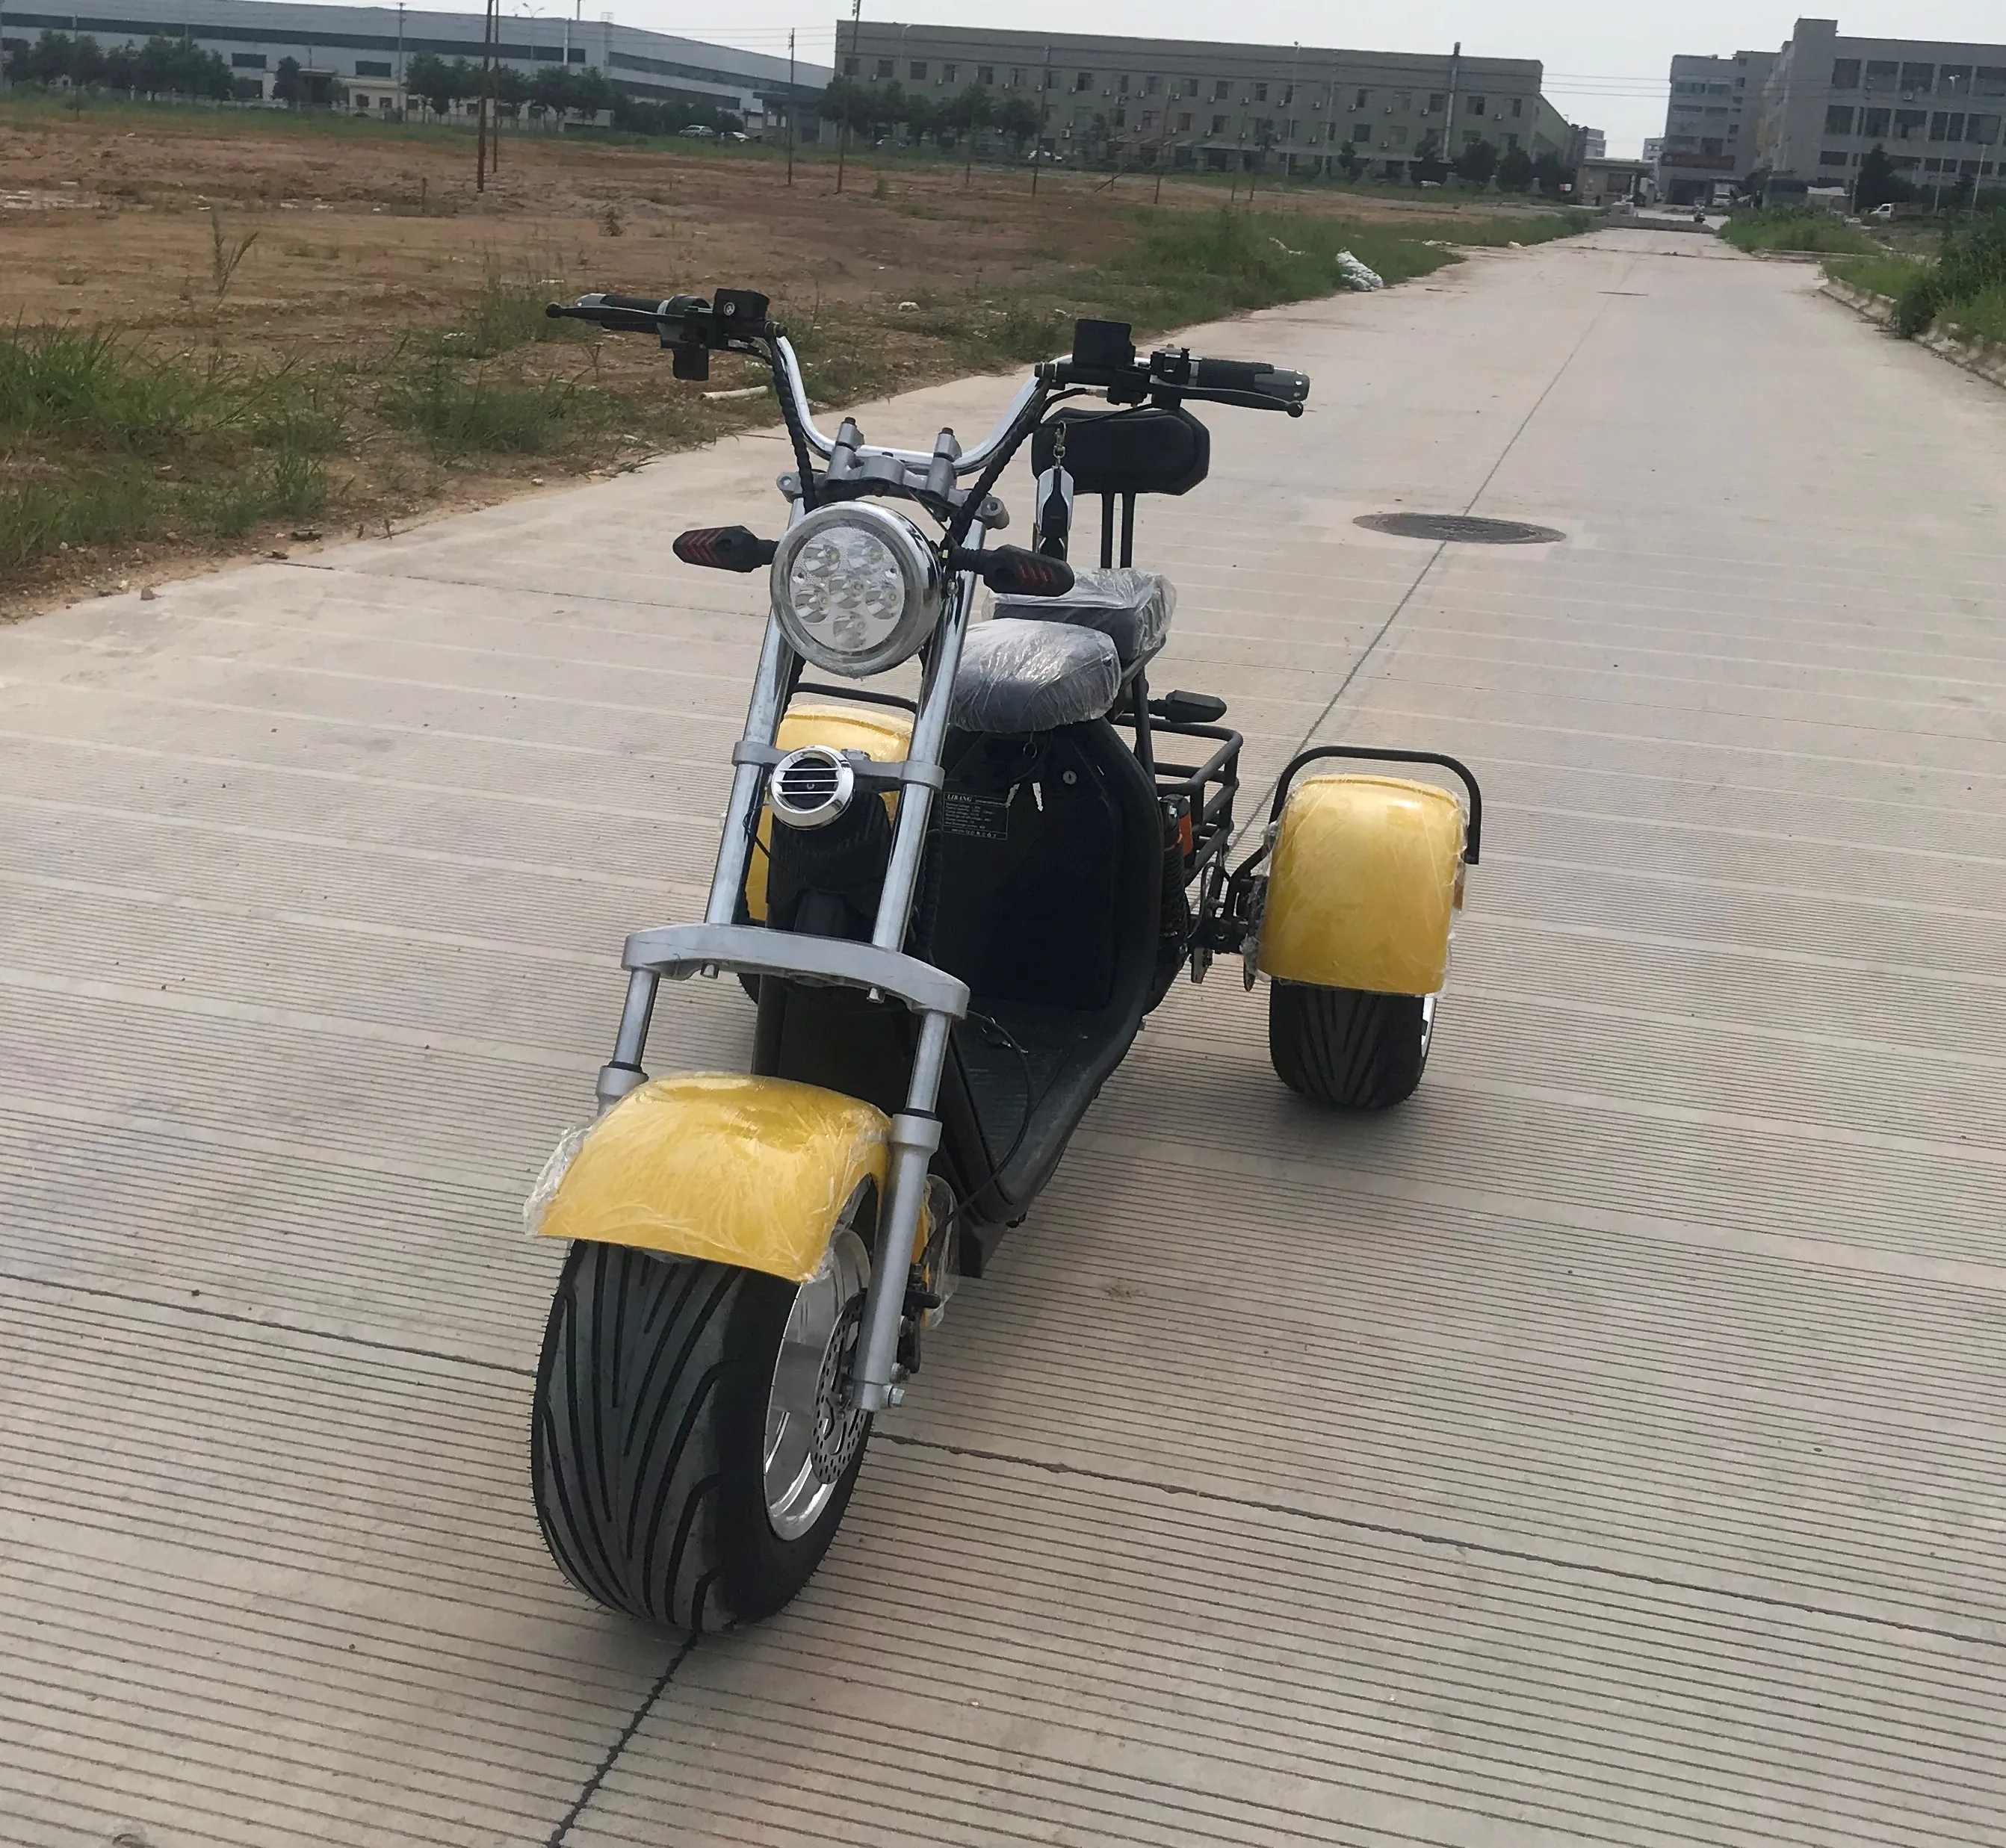 

New style CE electric scooter 1000w 3 wheel sport citycoco electric motorcycle with big wheels and removable seev citycoco, Customized color